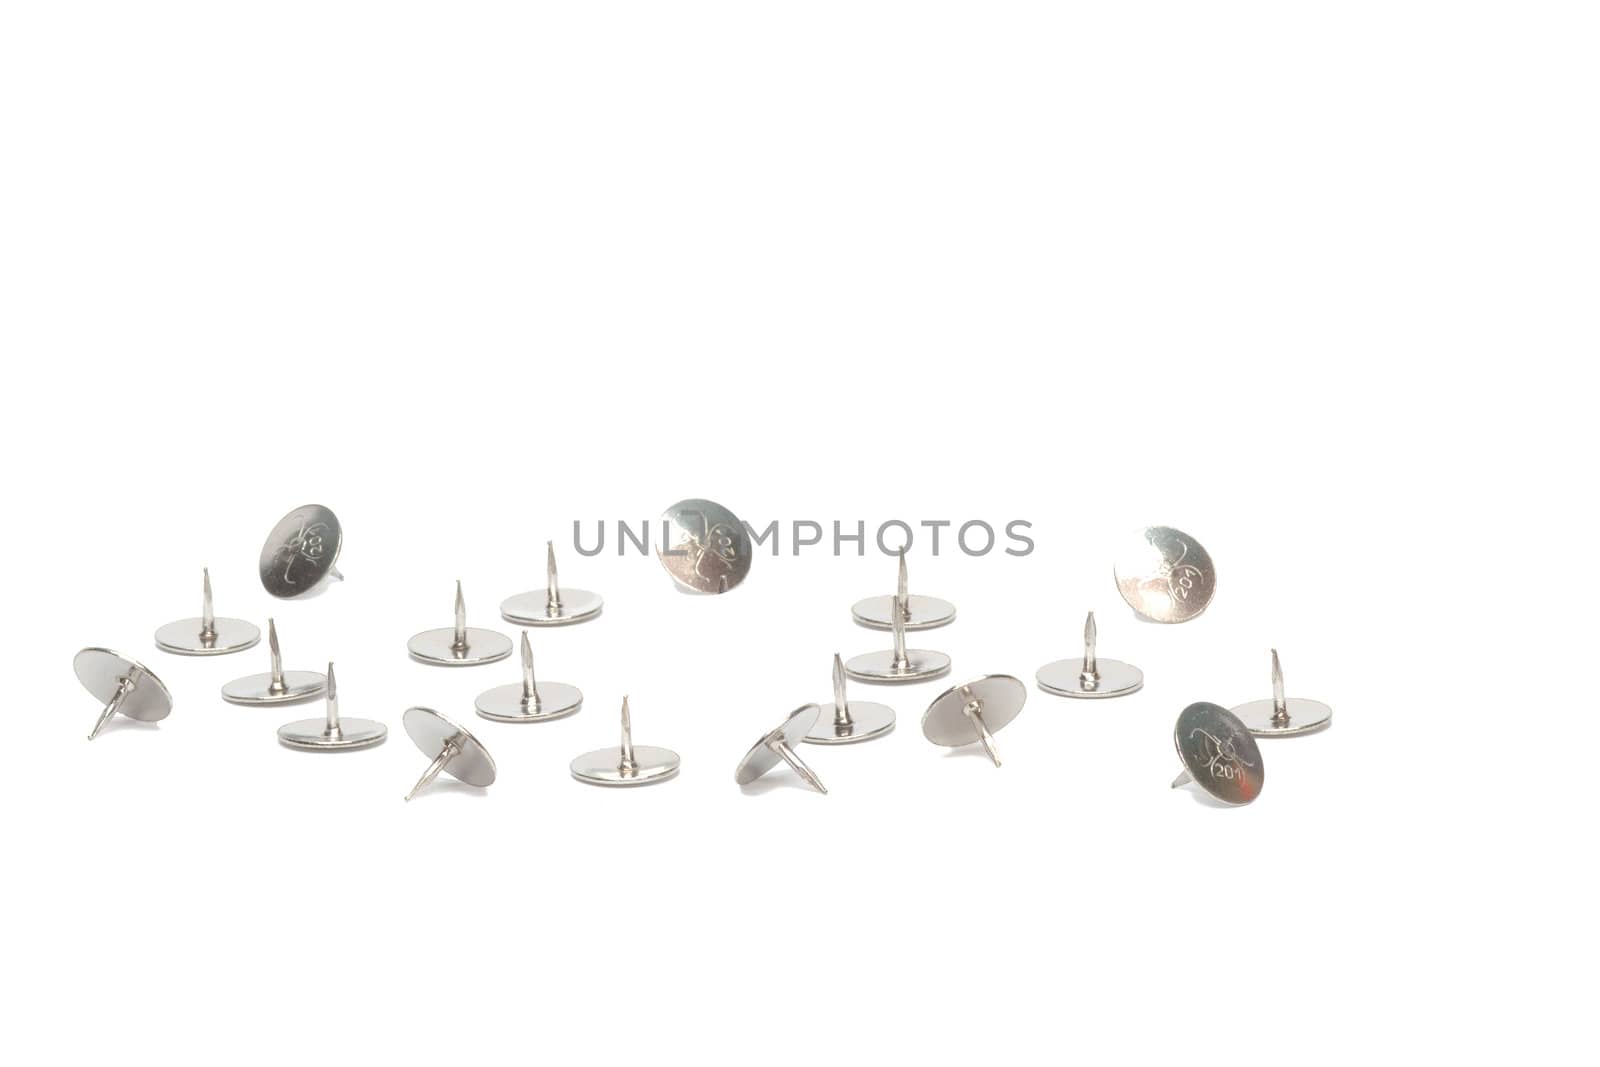 Metal tacks on a white background by LiborF